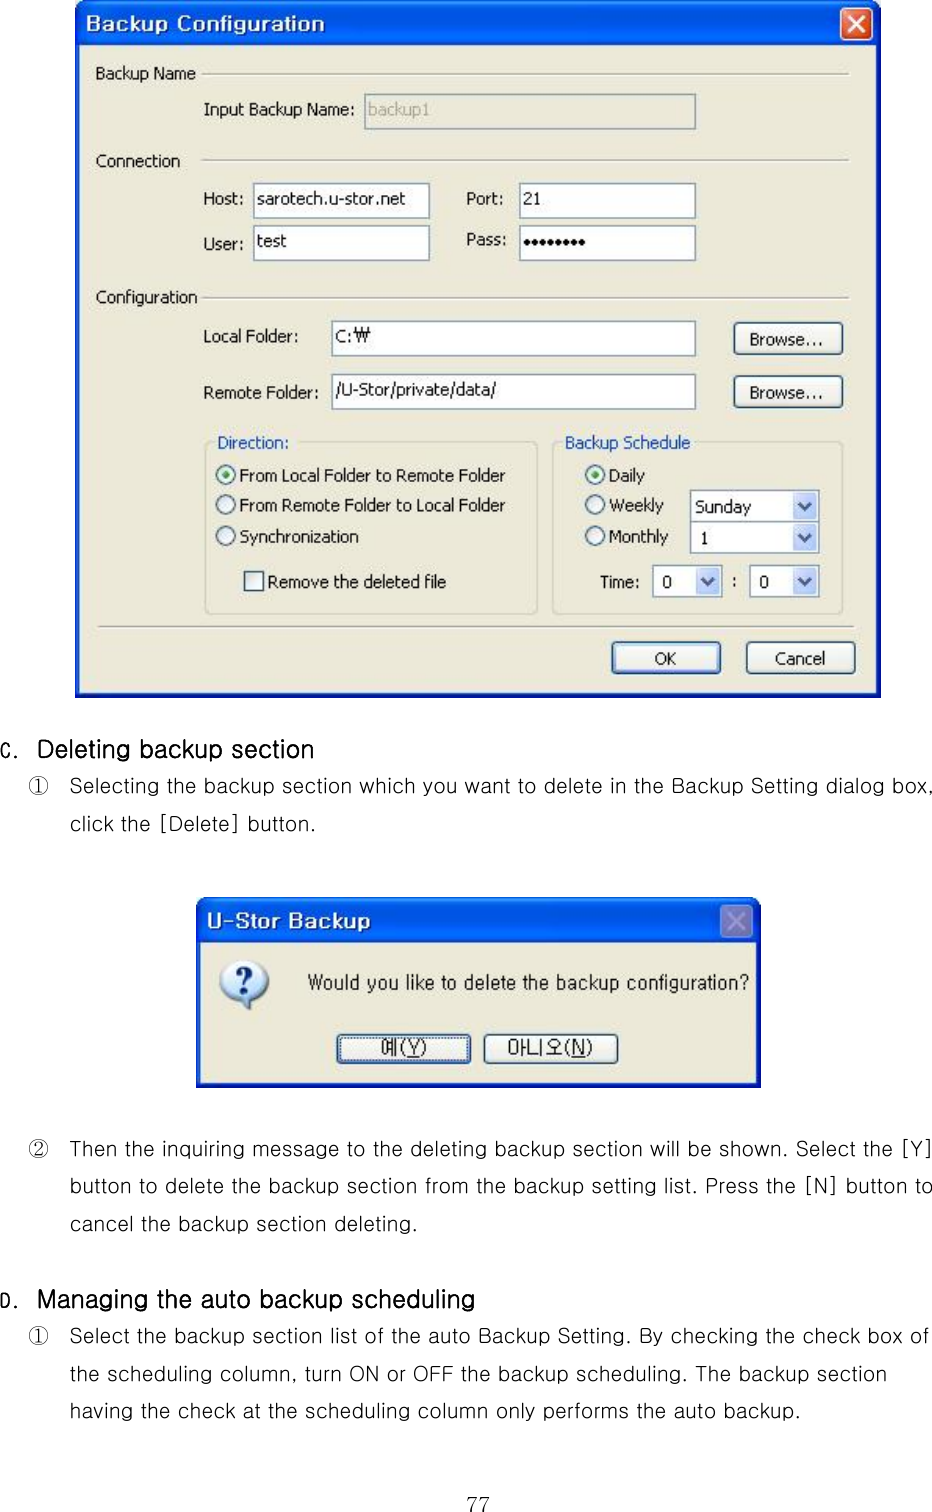  77 C.  Deleting backup section ①  Selecting the backup section which you want to delete in the Backup Setting dialog box, click the [Delete] button.  ②  Then the inquiring message to the deleting backup section will be shown. Select the [Y] button to delete the backup section from the backup setting list. Press the [N] button to cancel the backup section deleting. D.  Managing the auto backup scheduling ①  Select the backup section list of the auto Backup Setting. By checking the check box of the scheduling column, turn ON or OFF the backup scheduling. The backup section having the check at the scheduling column only performs the auto backup.   